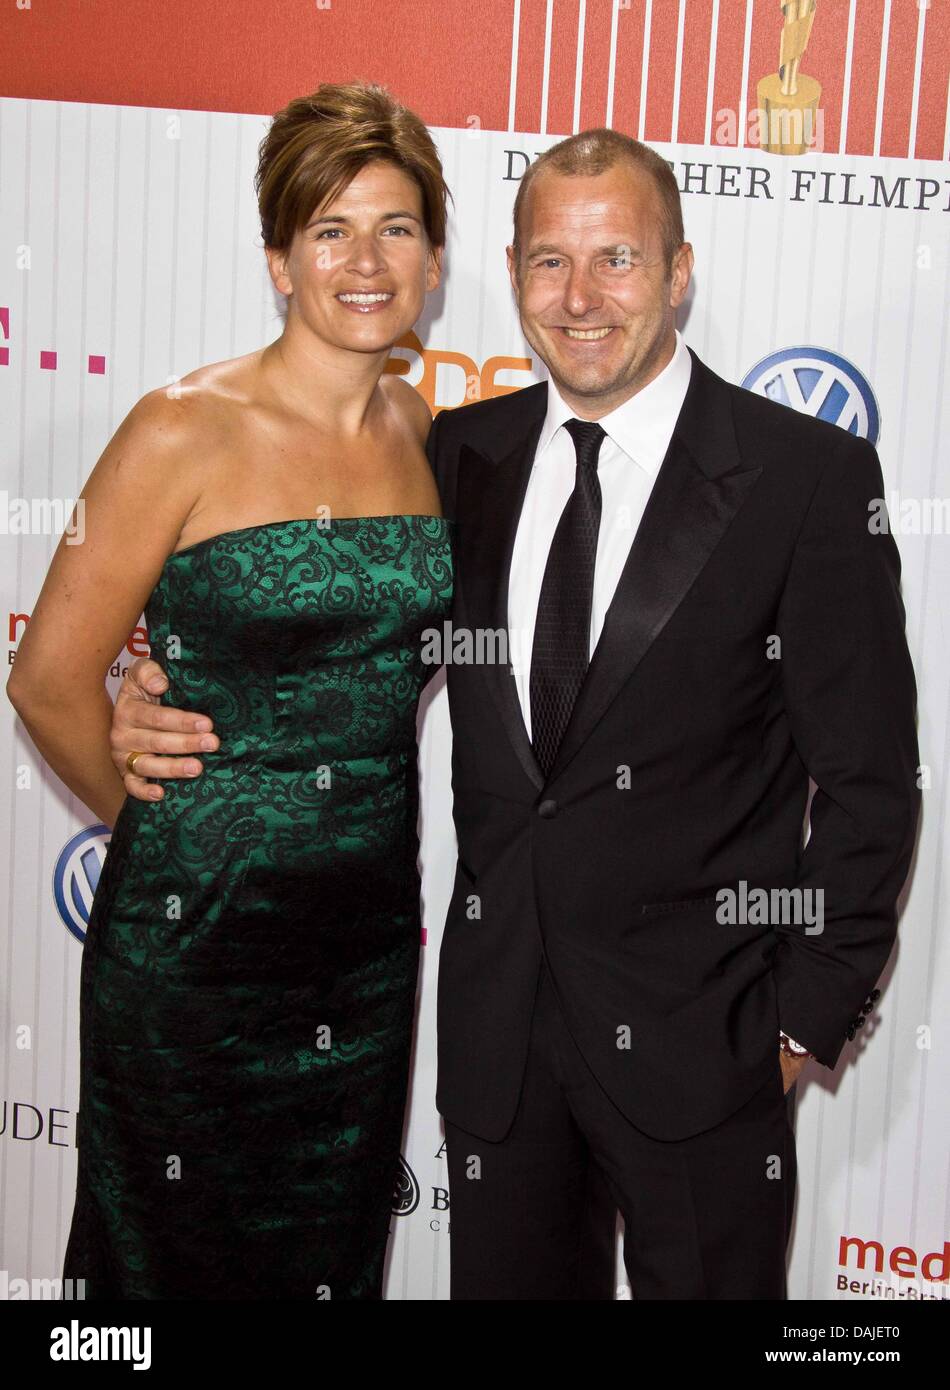 German actor Heino Ferch (L) and his wife Marie-Jeanette arrive for the award ceremony of the German Film Prize 'Lola' in Berlin, Germany, 8 April 2011. The German Film Prize 'Lola' awards members of the film industry in 16 categories. Photo: Hubert Boesl Stock Photo